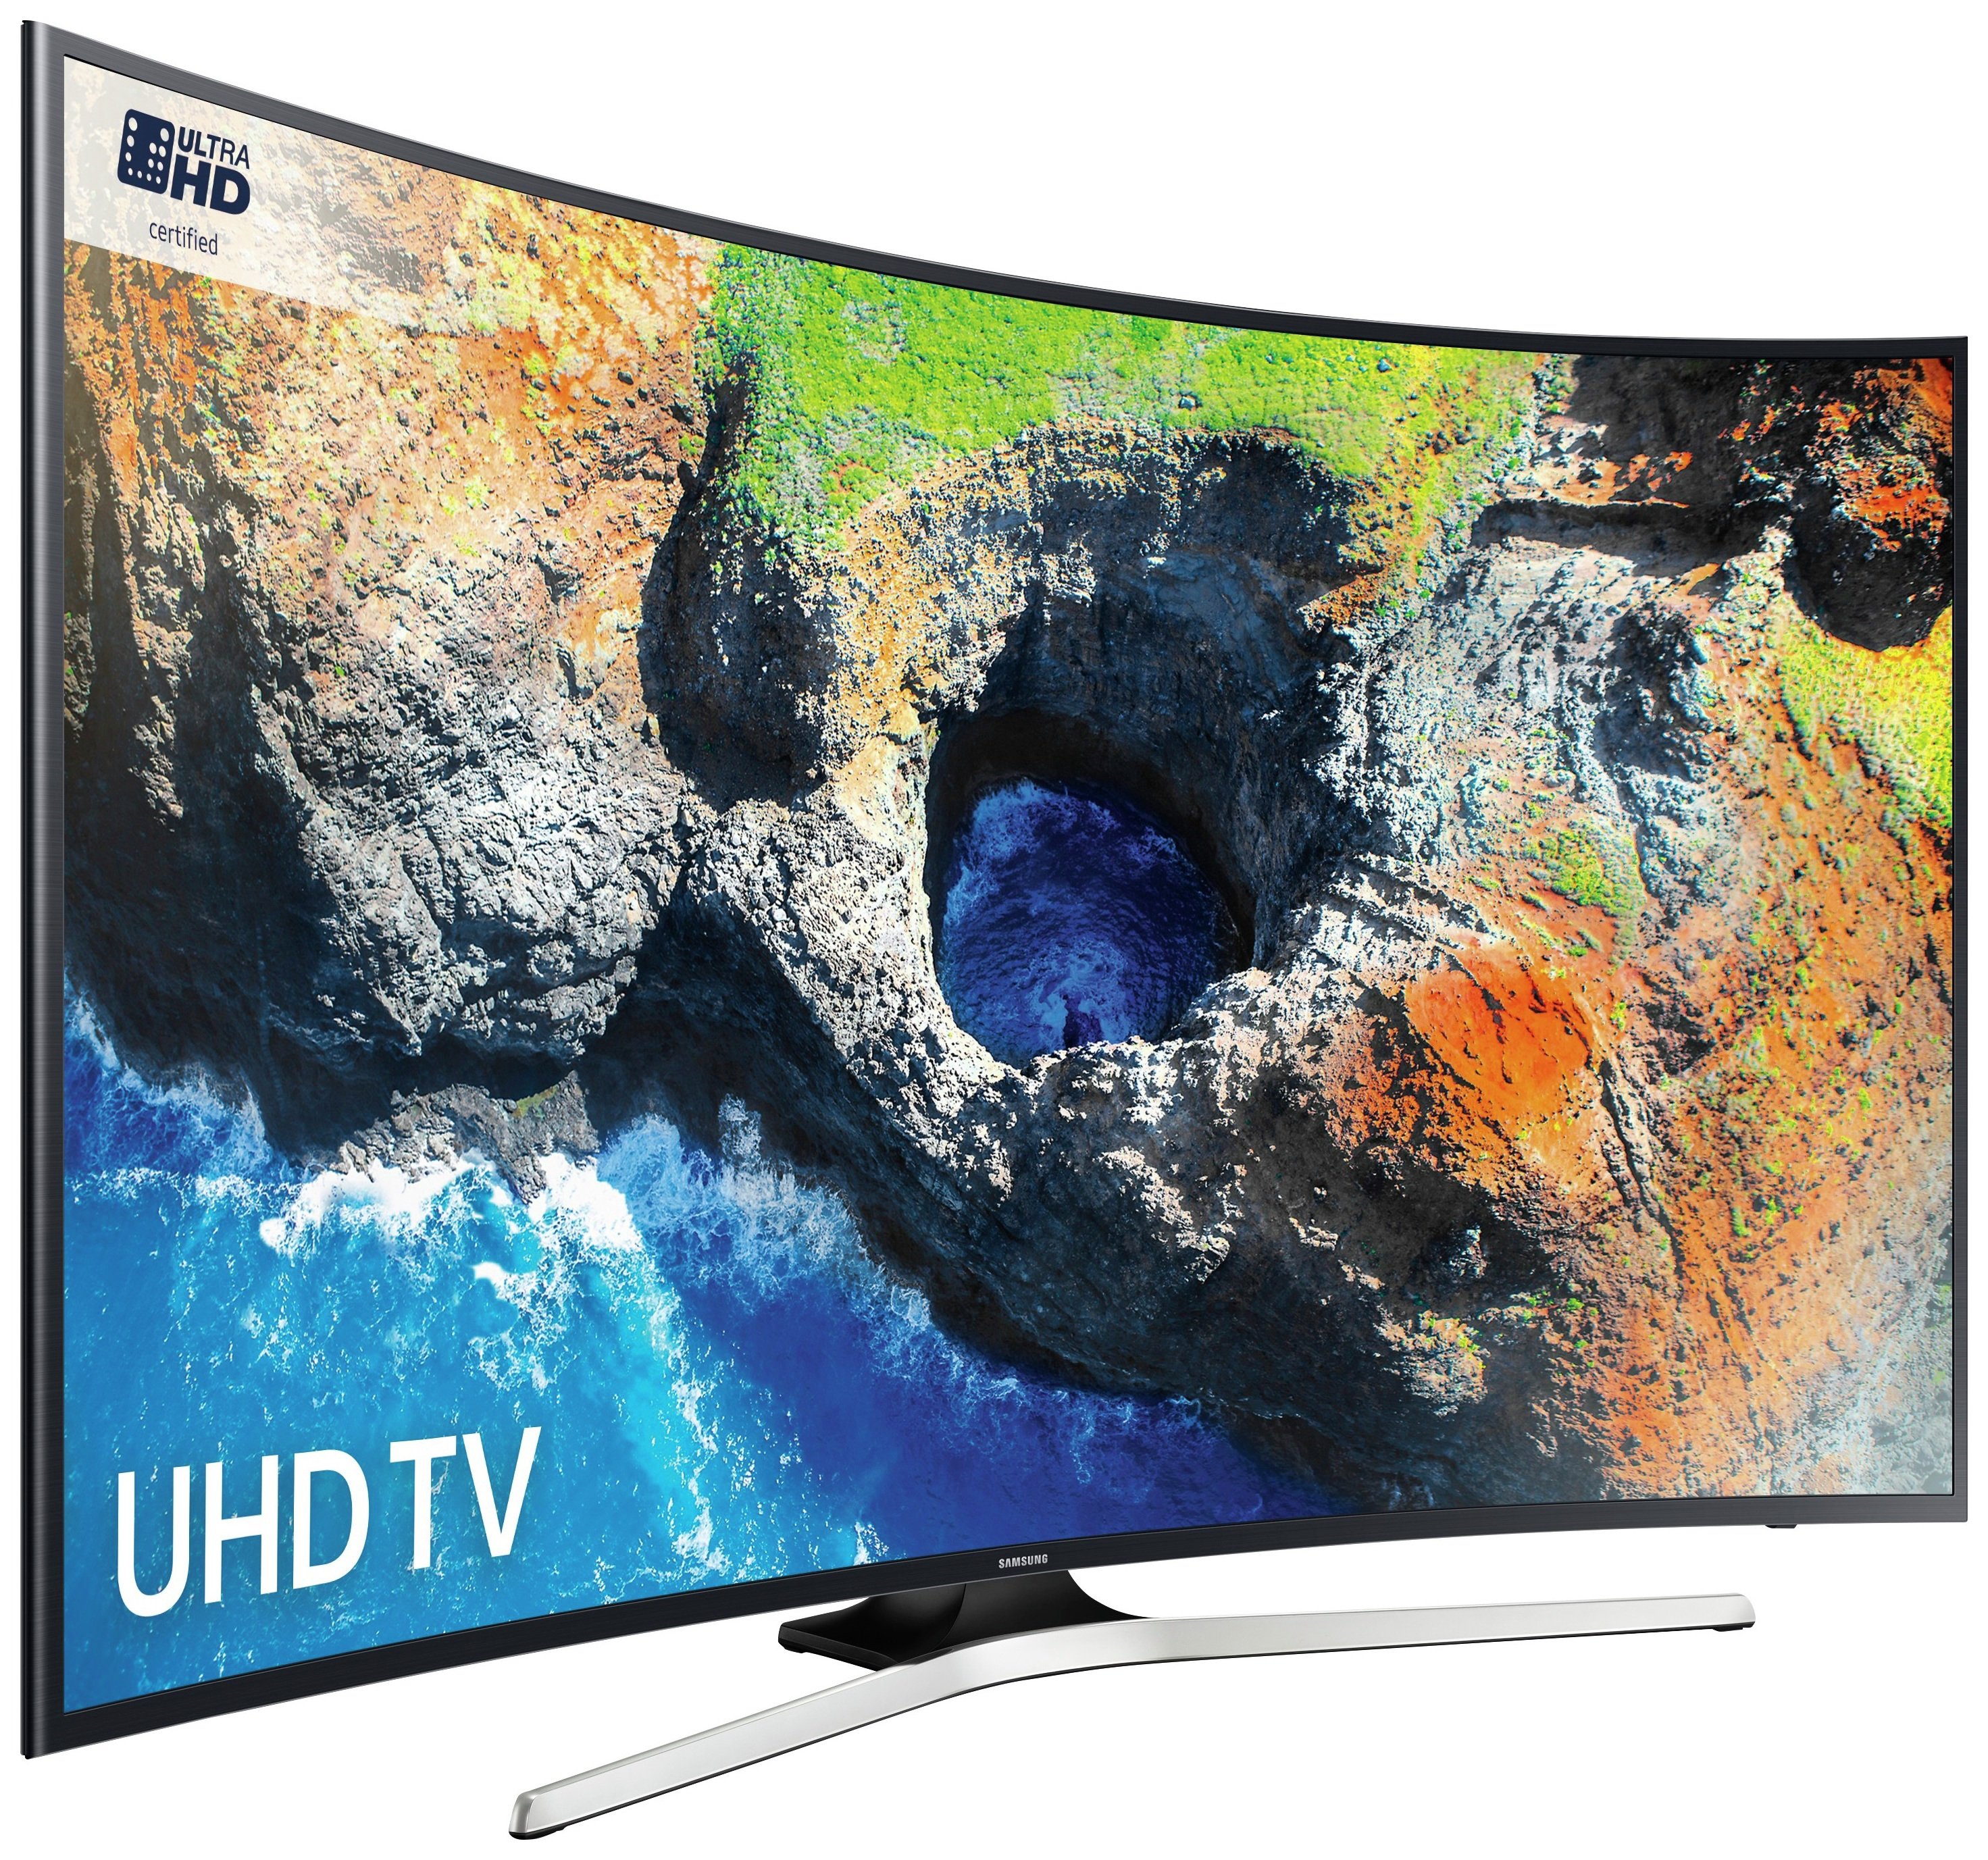 Samsung 49MU6220 49 Inch Curved 4K UHD Smart TV with HDR. Review thumbnail